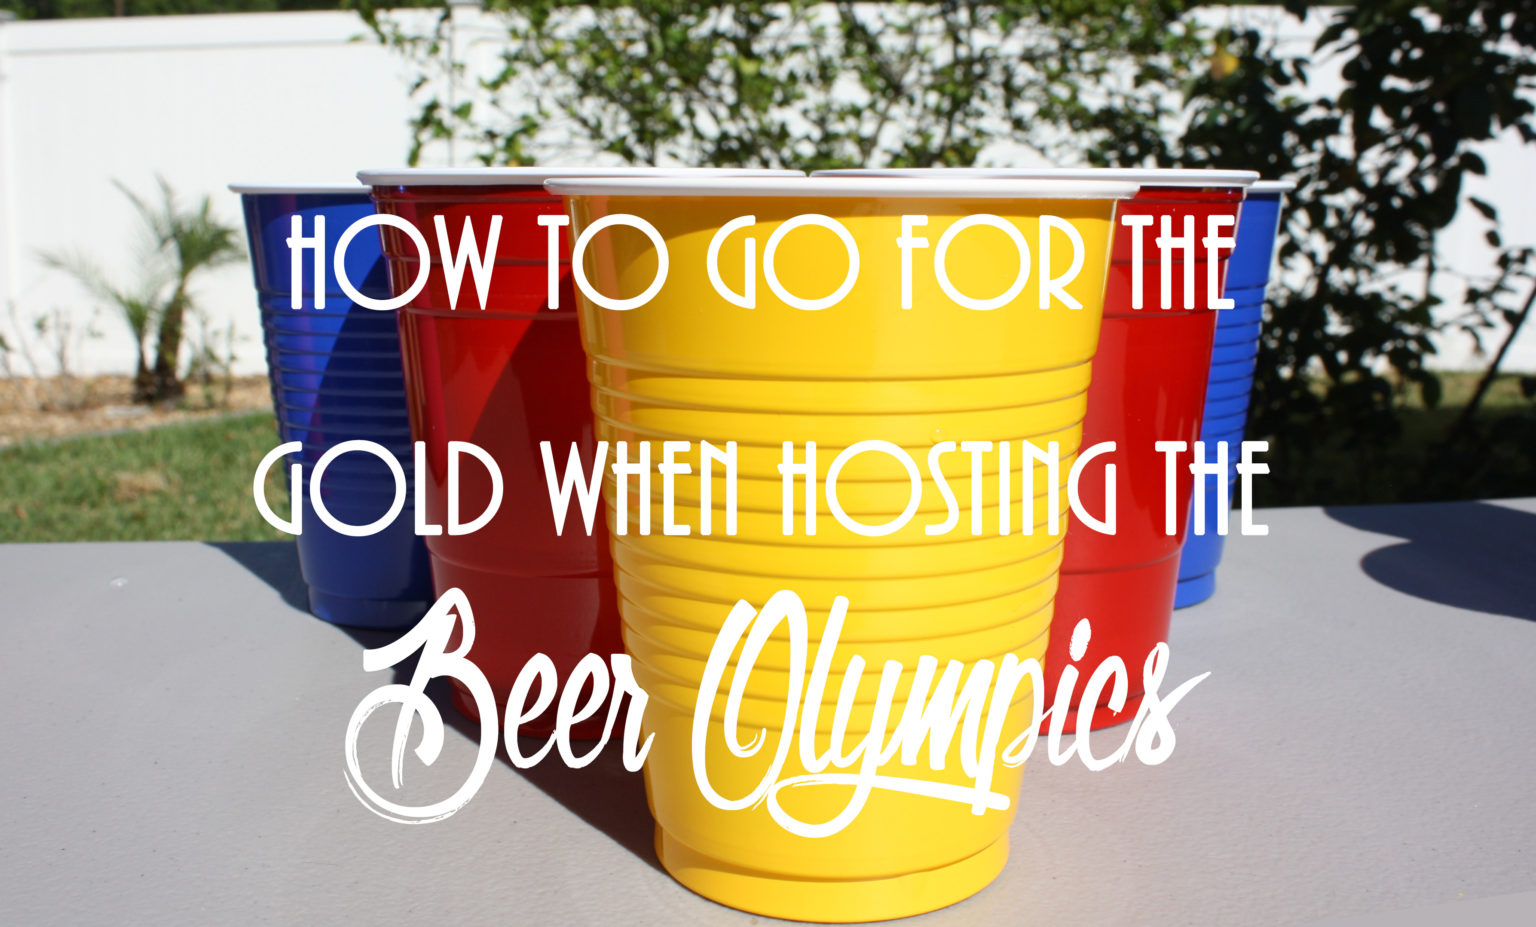 How to Go for the Gold When Hosting the Beer Olympics Public Displays